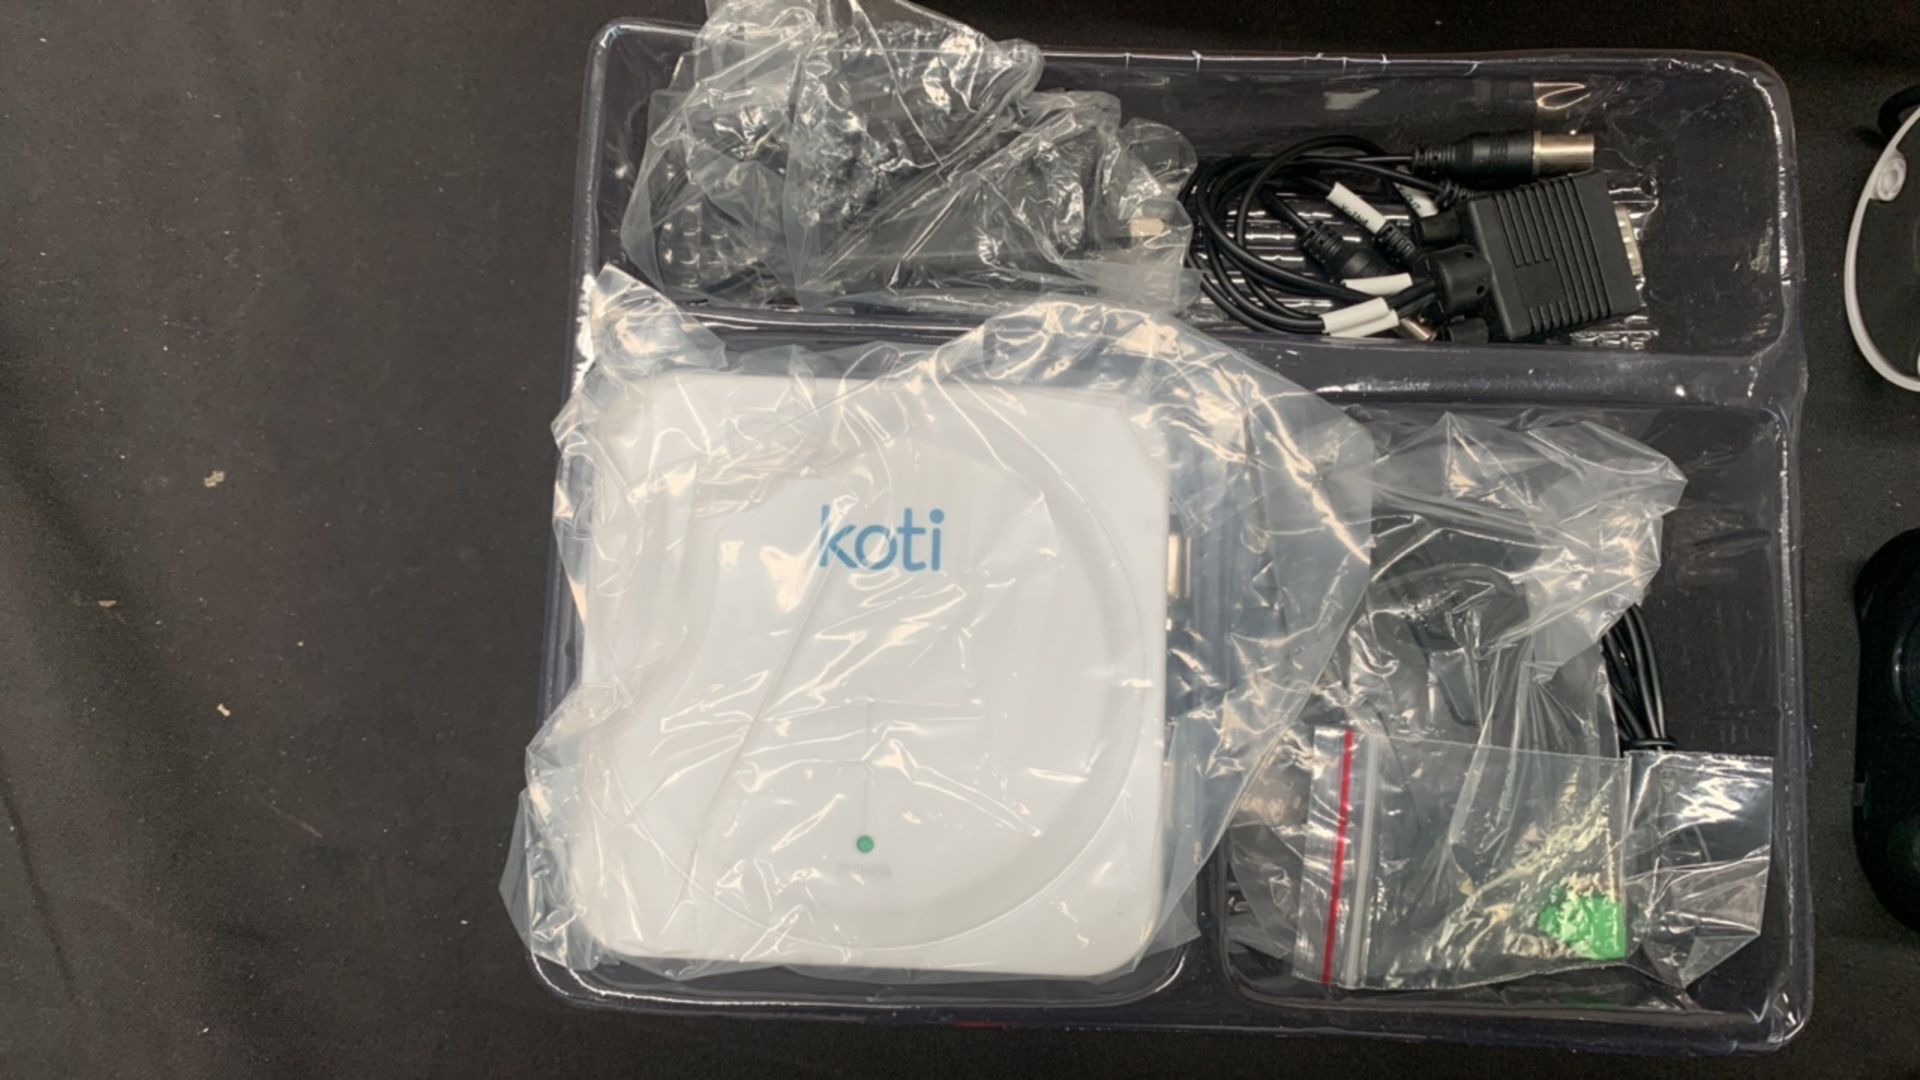 KOTI 4CHANNEL SECURITY SET WITH 4 PIR CA - Image 7 of 7